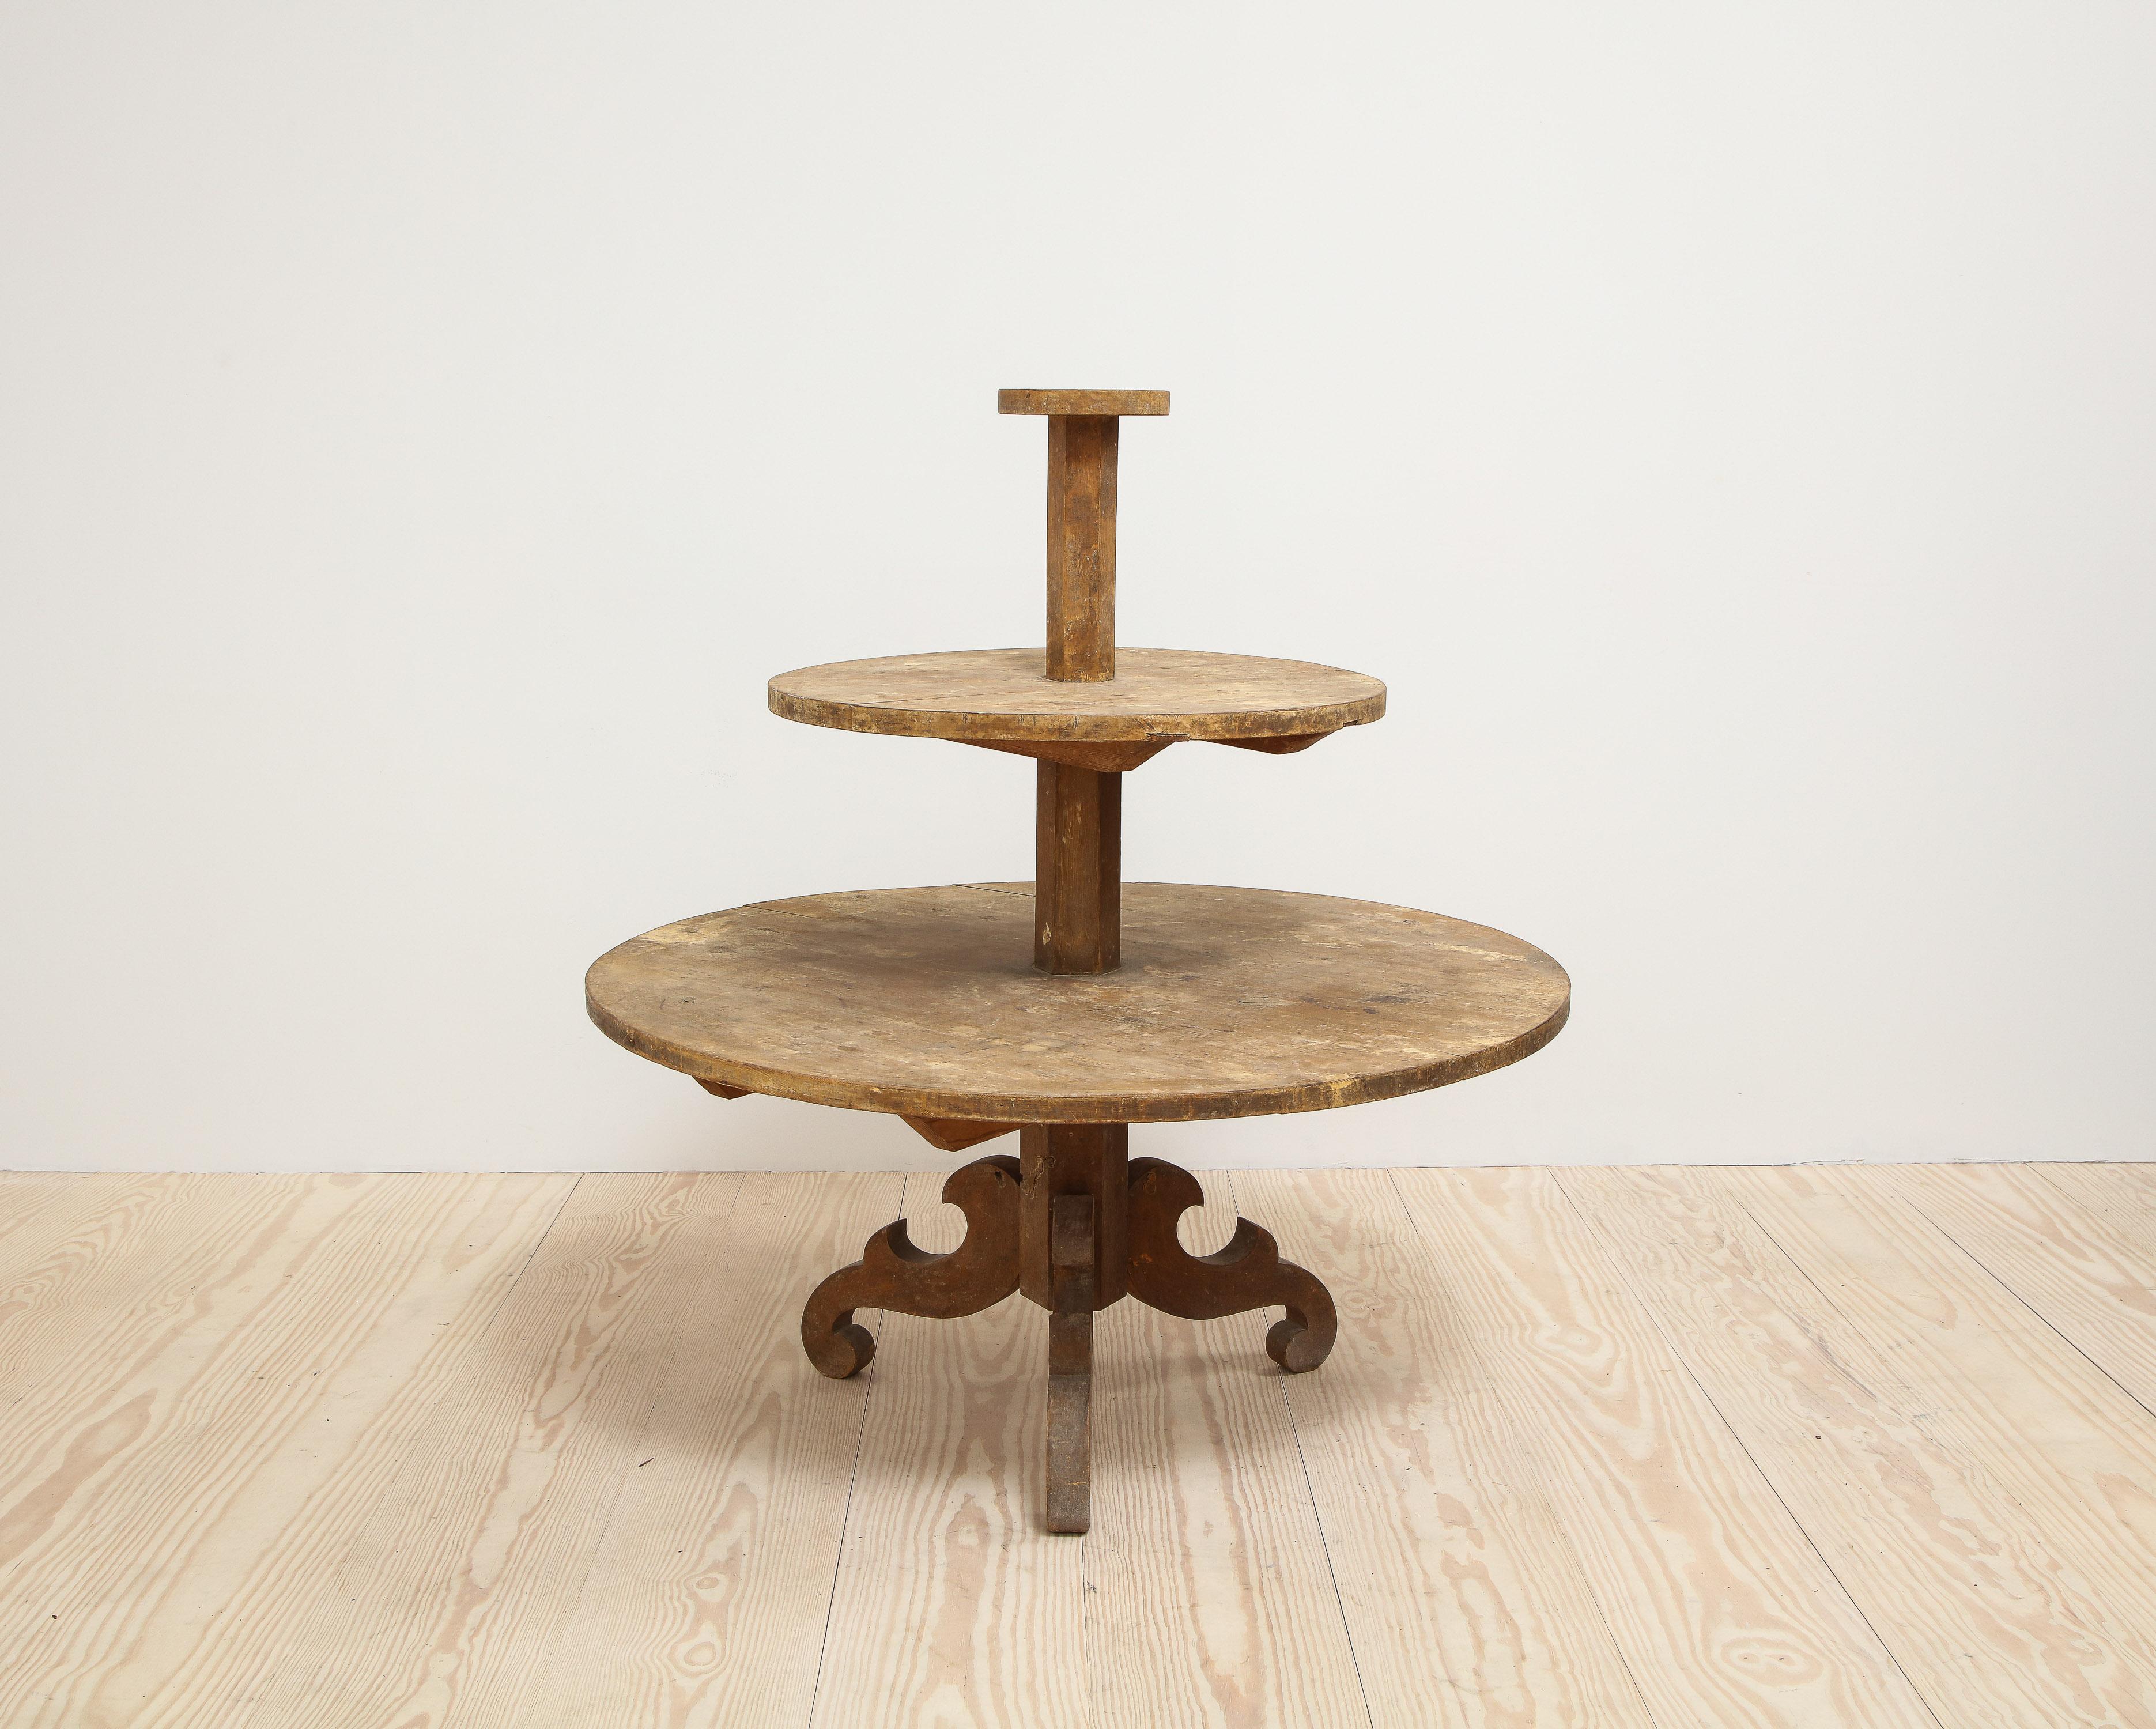 Exceptional, Swedish, 19th century, allmoge oversized round étagère or plant stand with wonderfully hand-carved base, origin: Sweden, circa 1820 - 1840